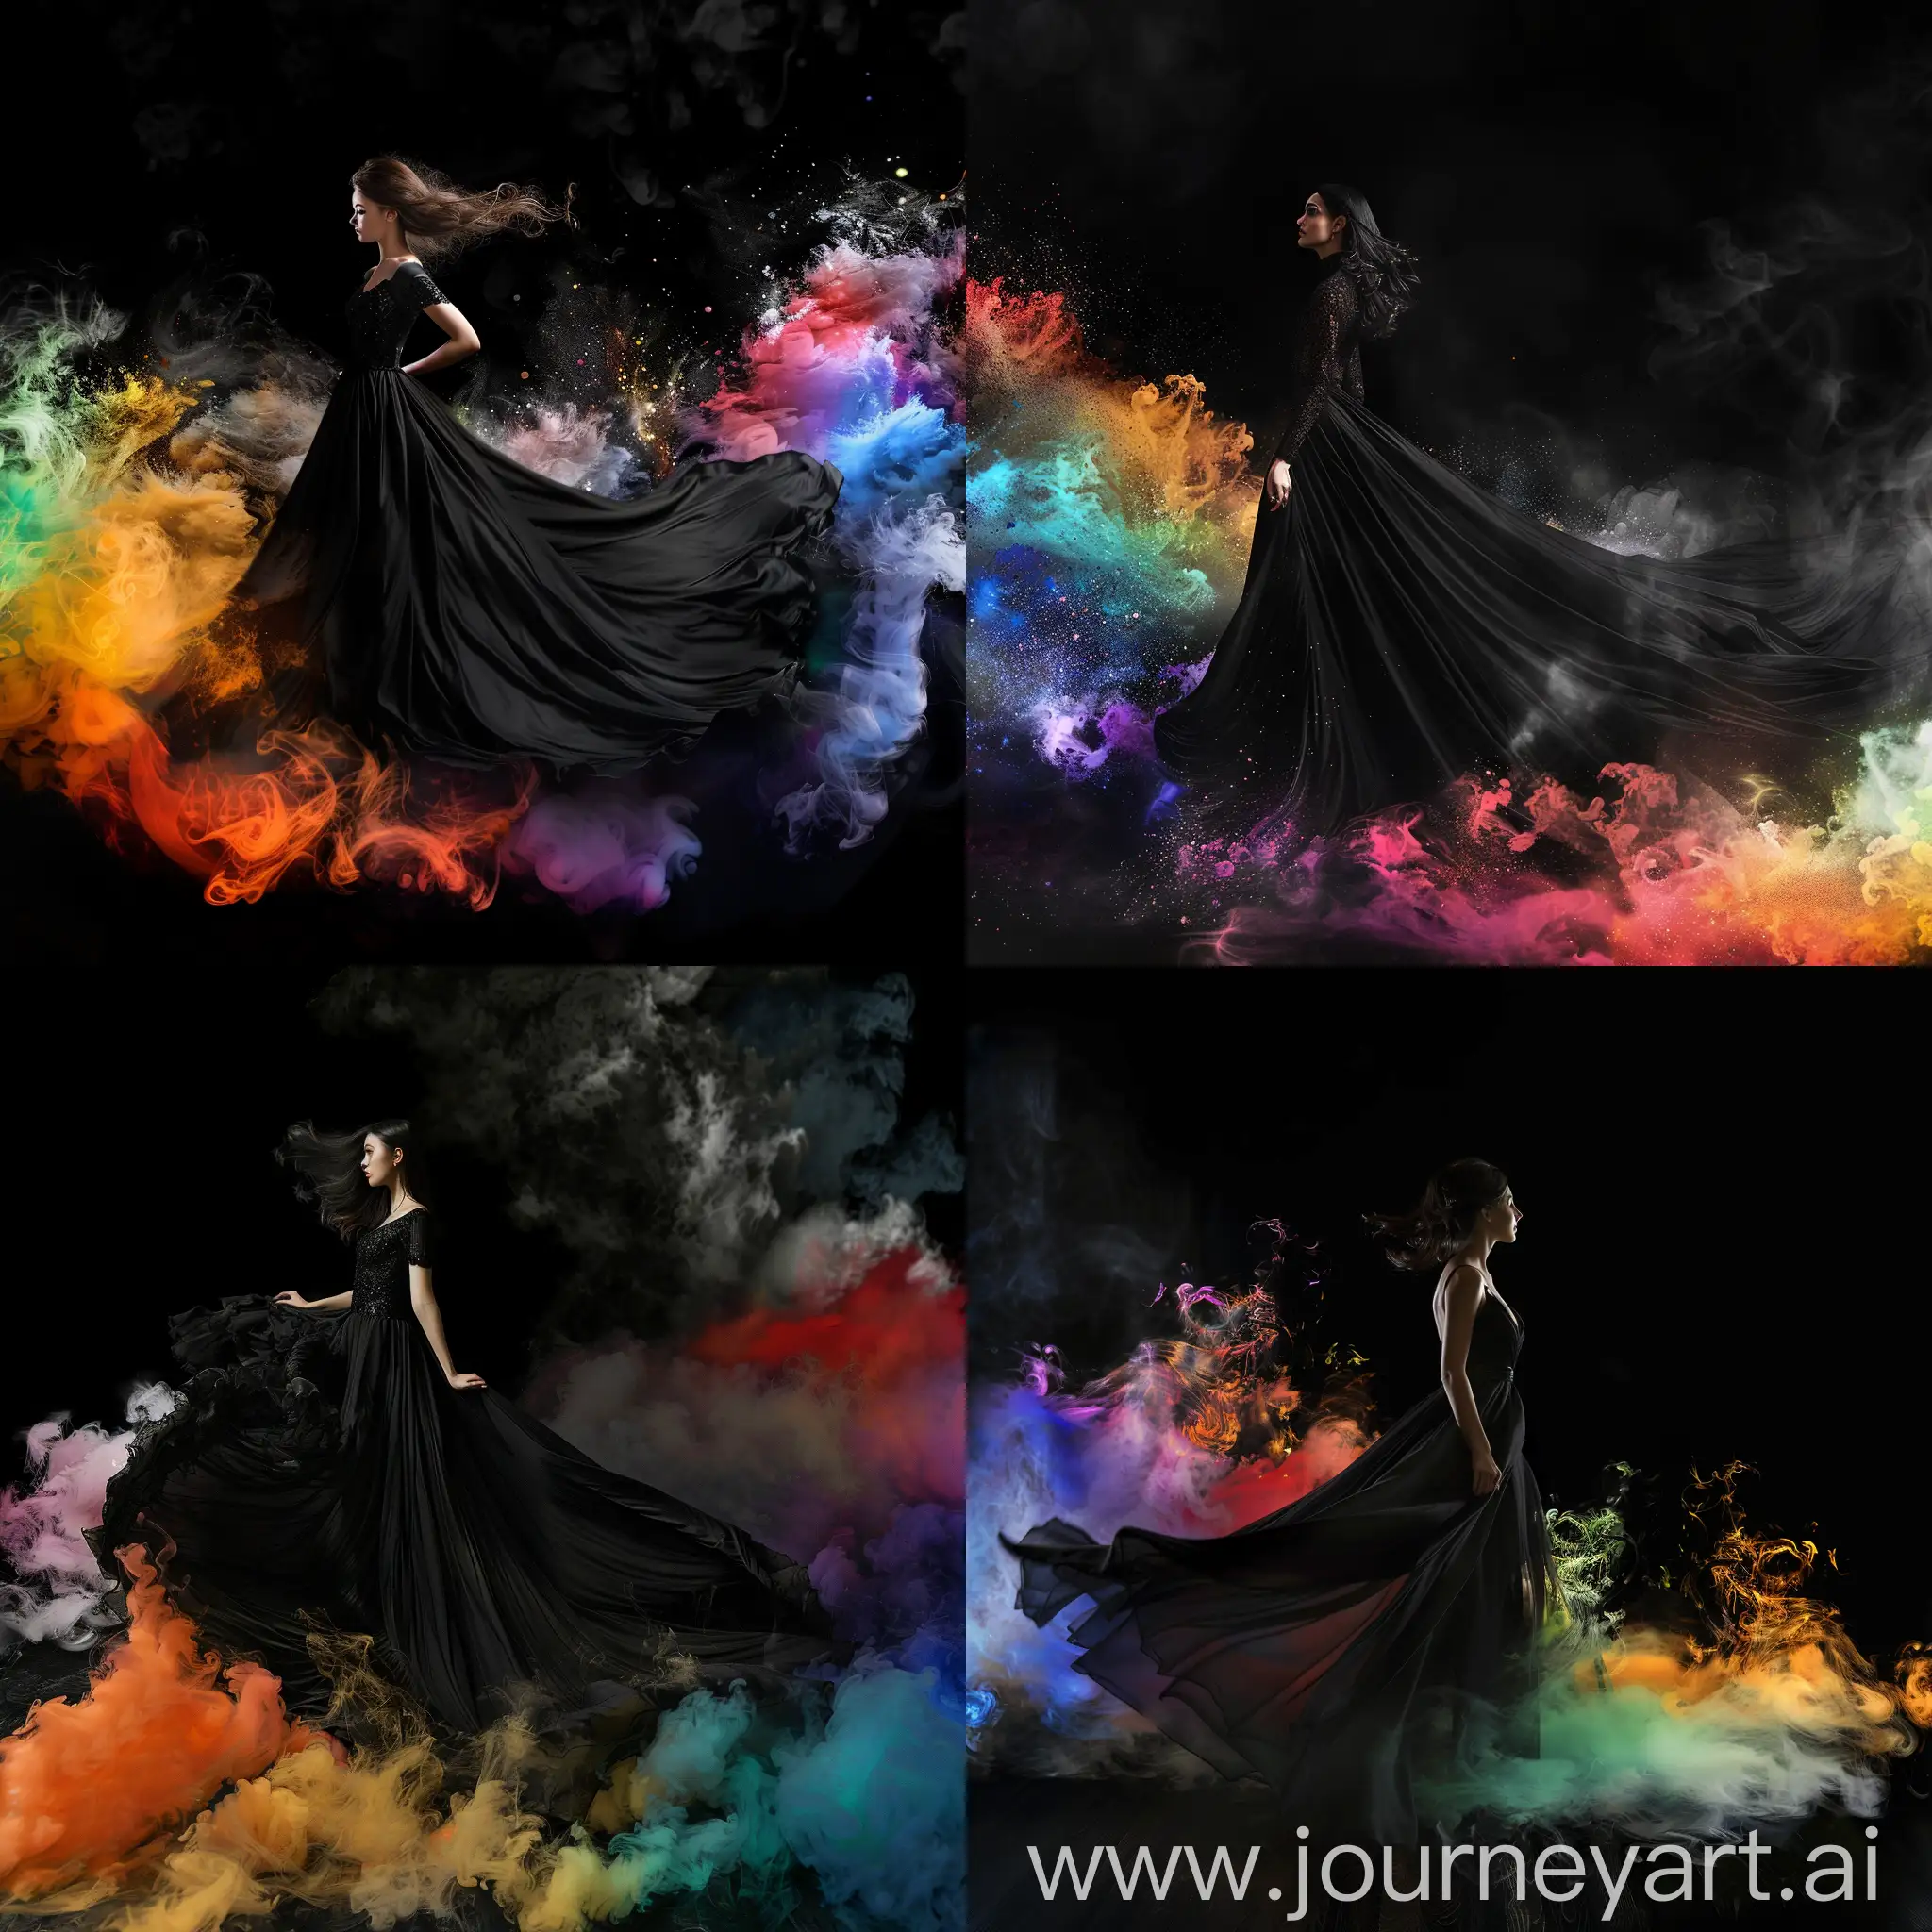 Elegant-Girl-in-Black-Dress-with-Flowing-Train-Amidst-Vibrant-Smoke